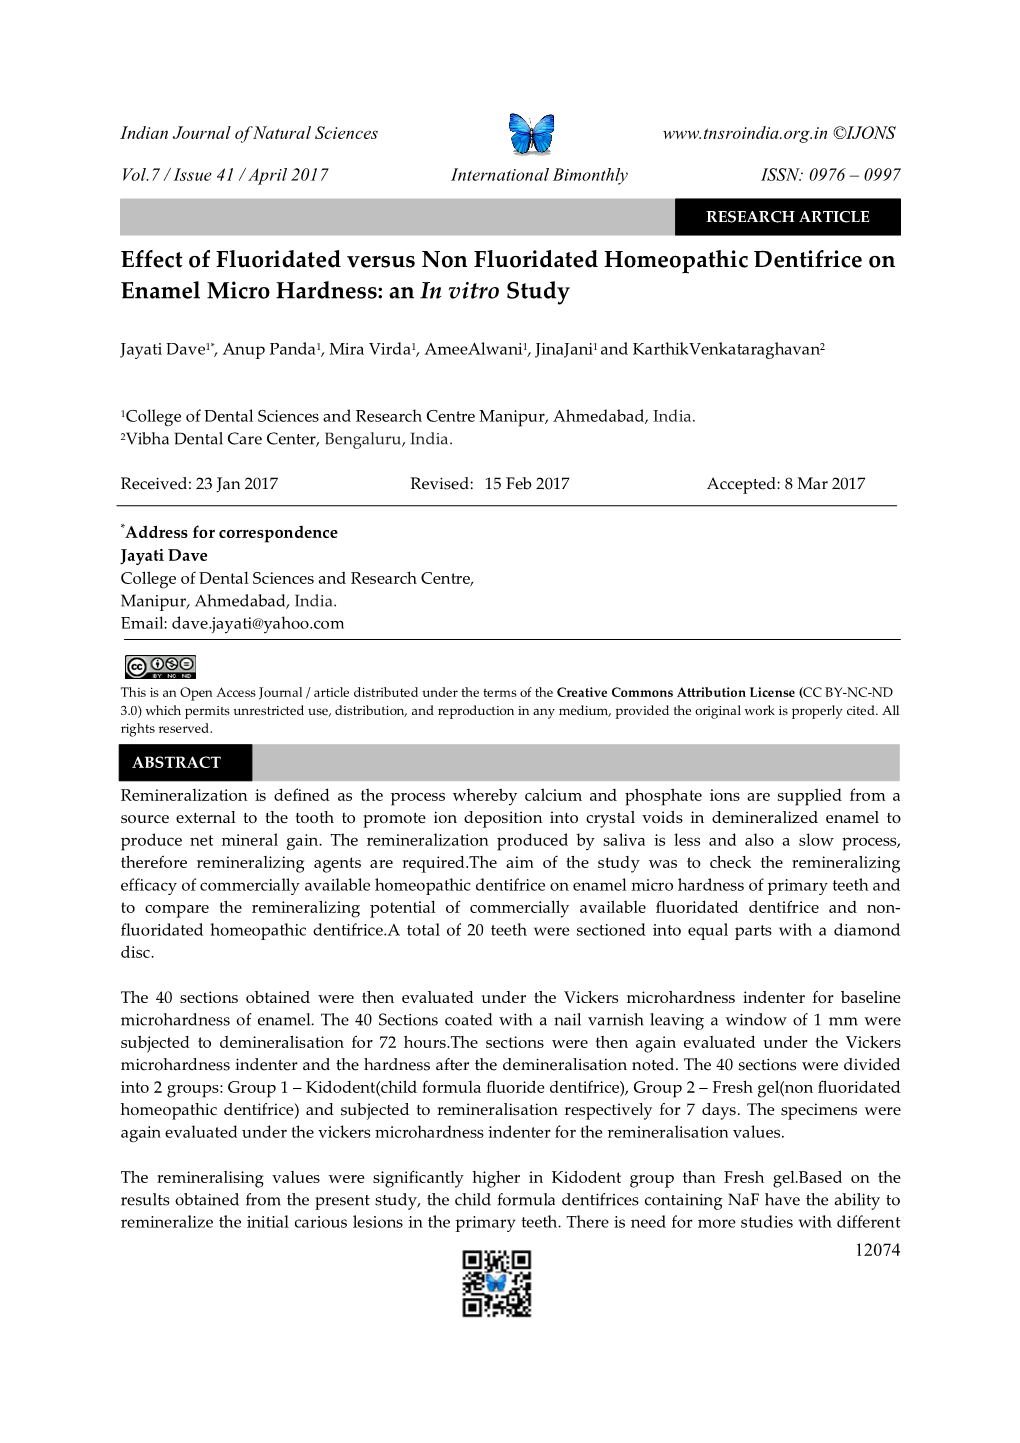 Effect of Fluoridated Versus Non Fluoridated Homeopathic Dentifrice on Enamel Micro Hardness: an in Vitro Study